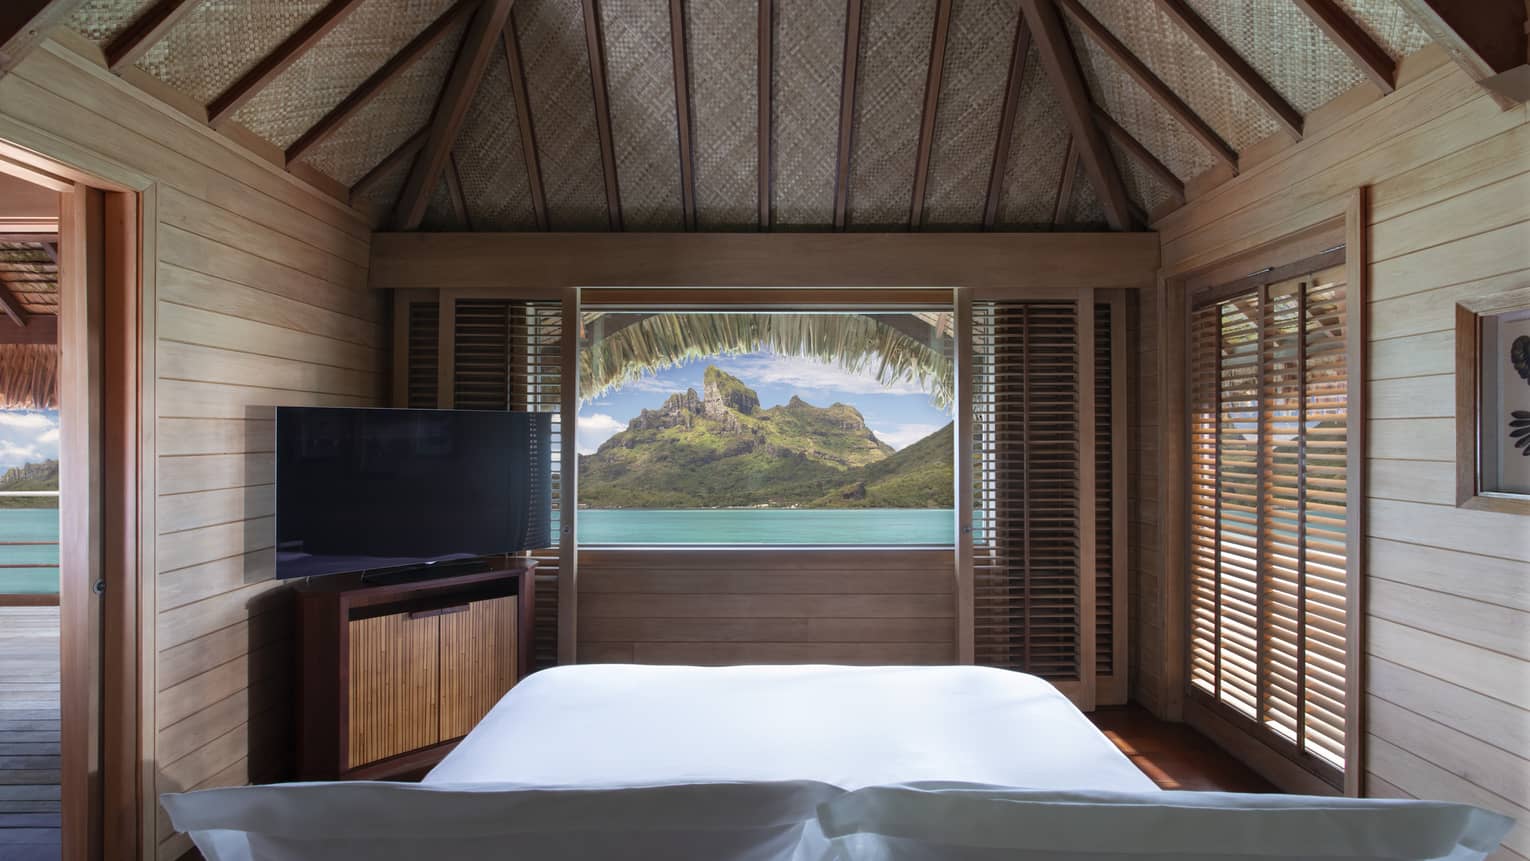 Lagoon and mountain view from a teak-walled guest room